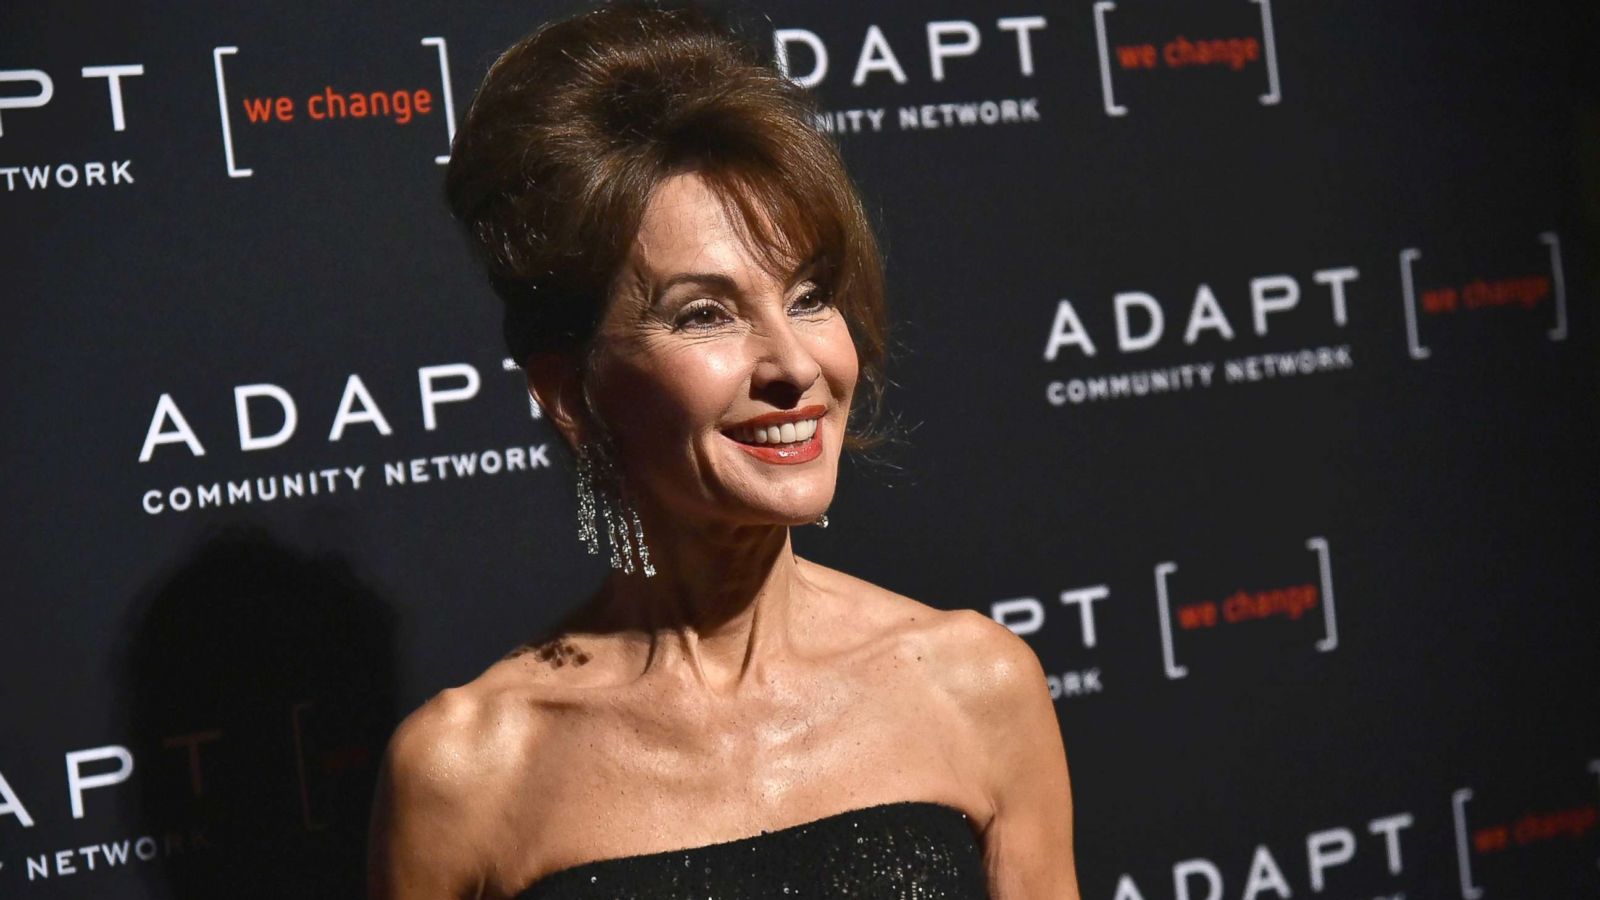 Soap opera star susan lucci urges women to look out for heart disease symptoms following harrowing health scare